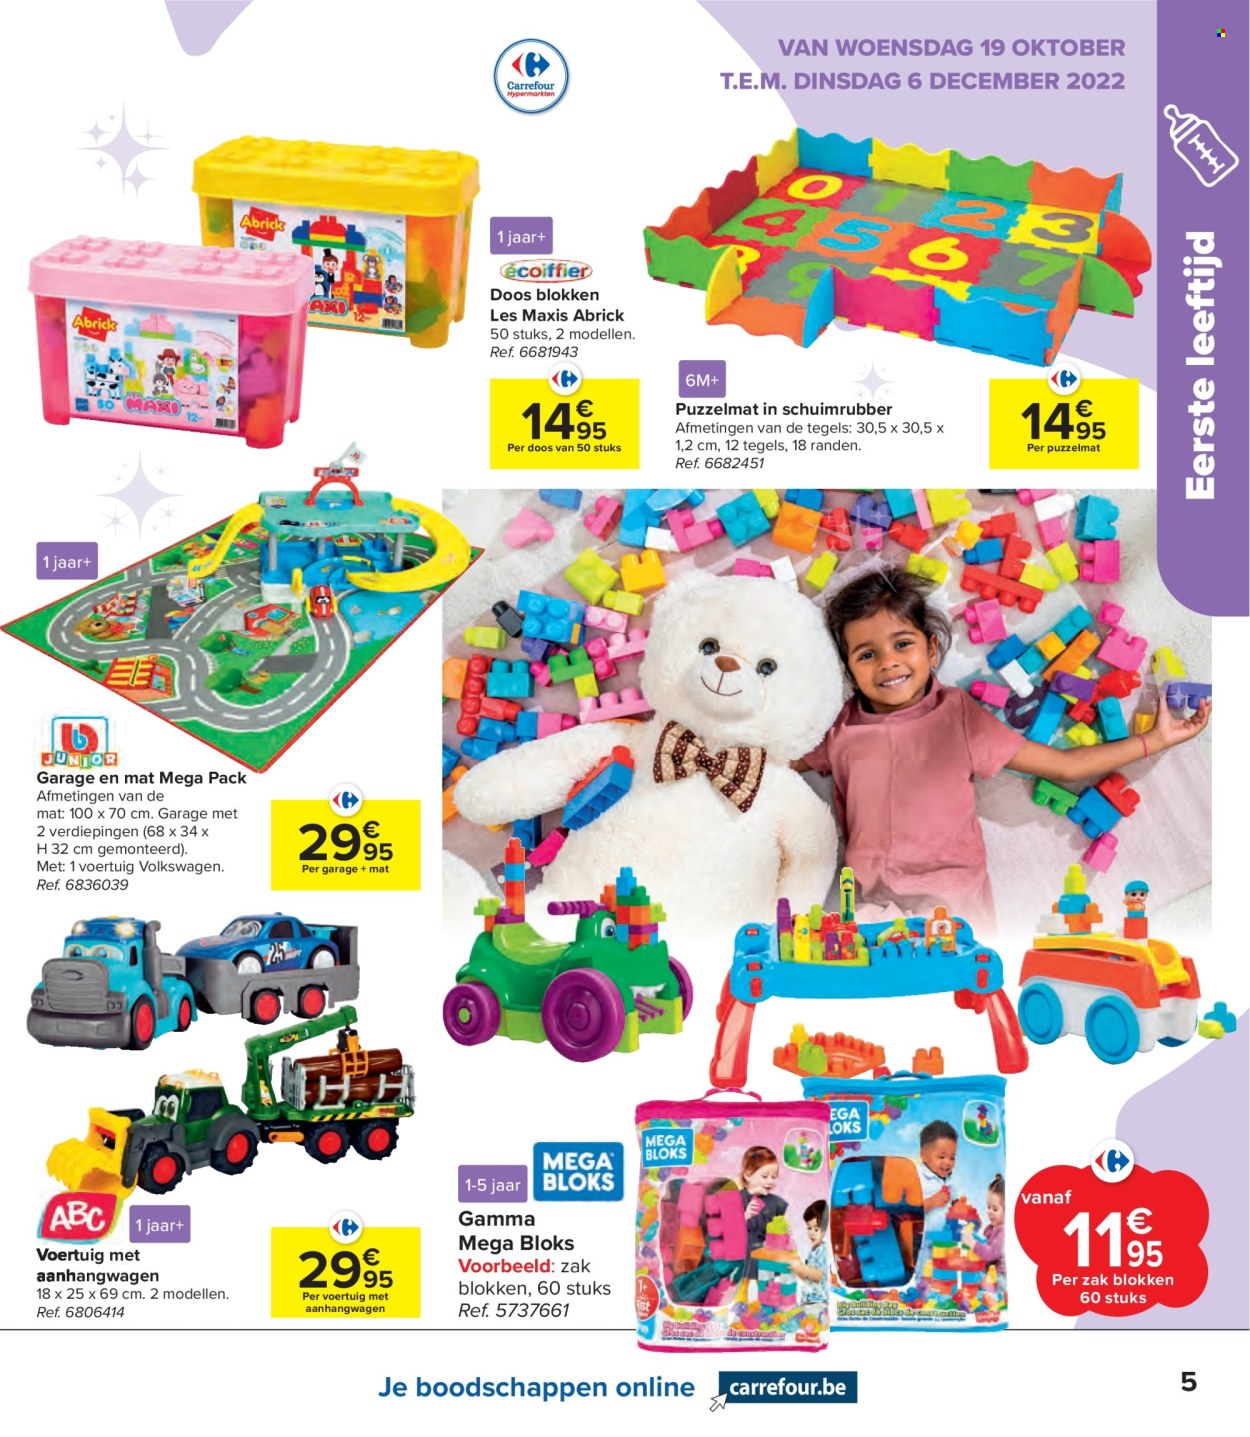 Catalogue Carrefour hypermarkt - 19.10.2022 - 6.12.2022. Page 5.